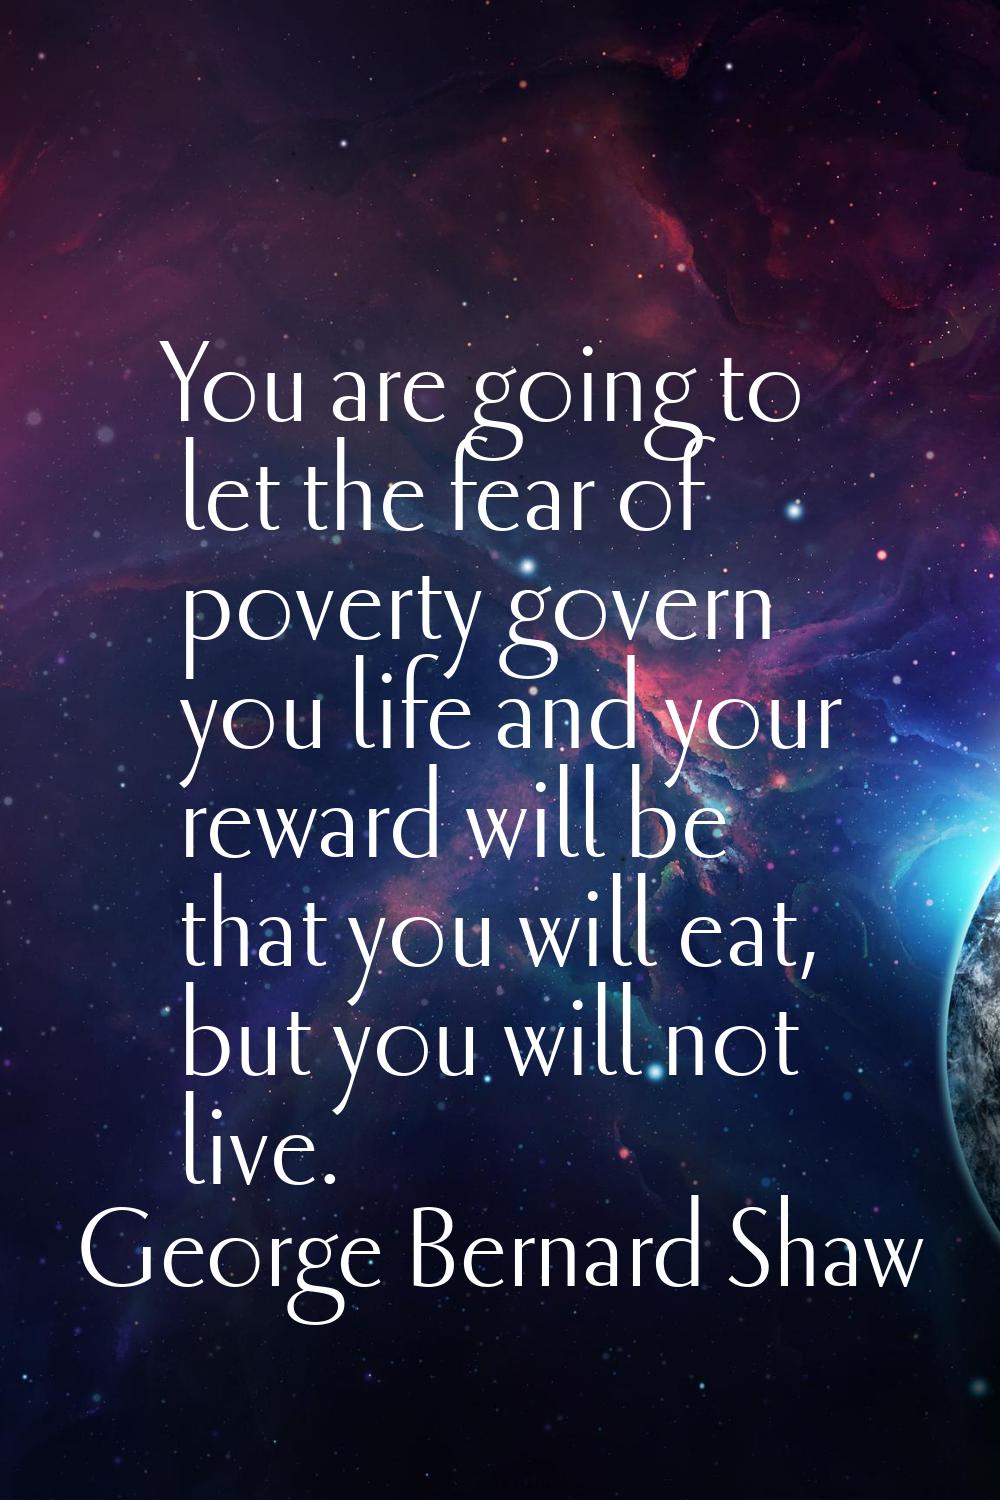 You are going to let the fear of poverty govern you life and your reward will be that you will eat,